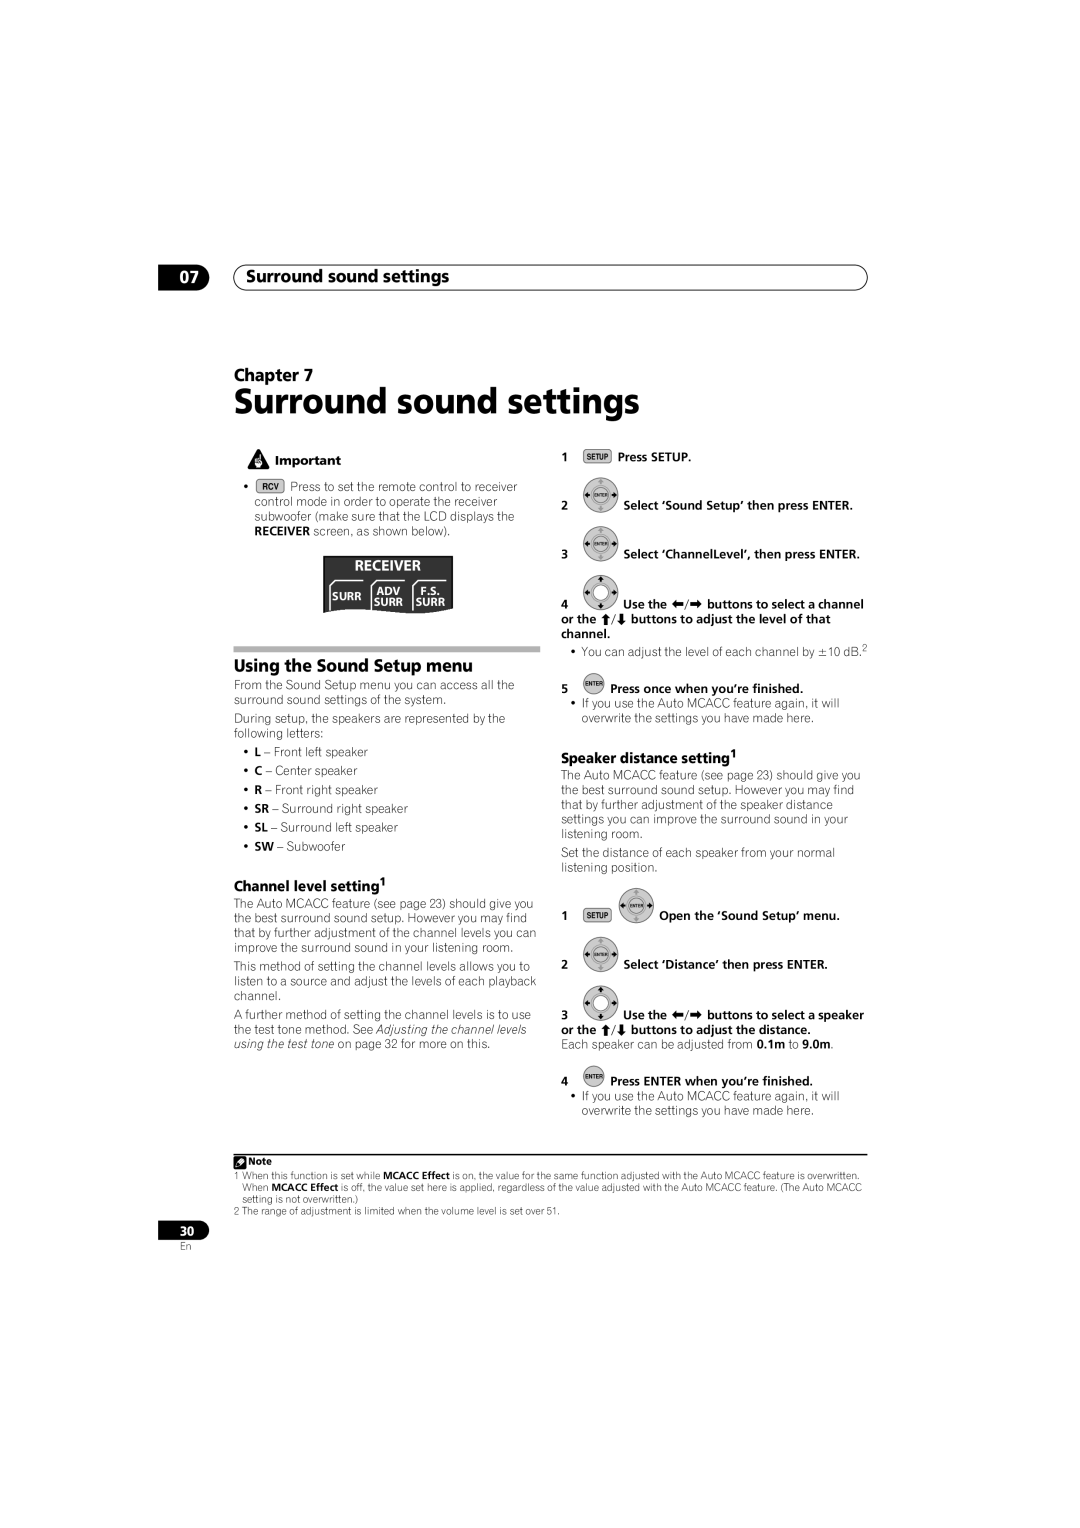 Pioneer AS-LX70 07Surround sound settings Chapter, Using the Sound Setup menu, Speaker distance setting1, Receiver 